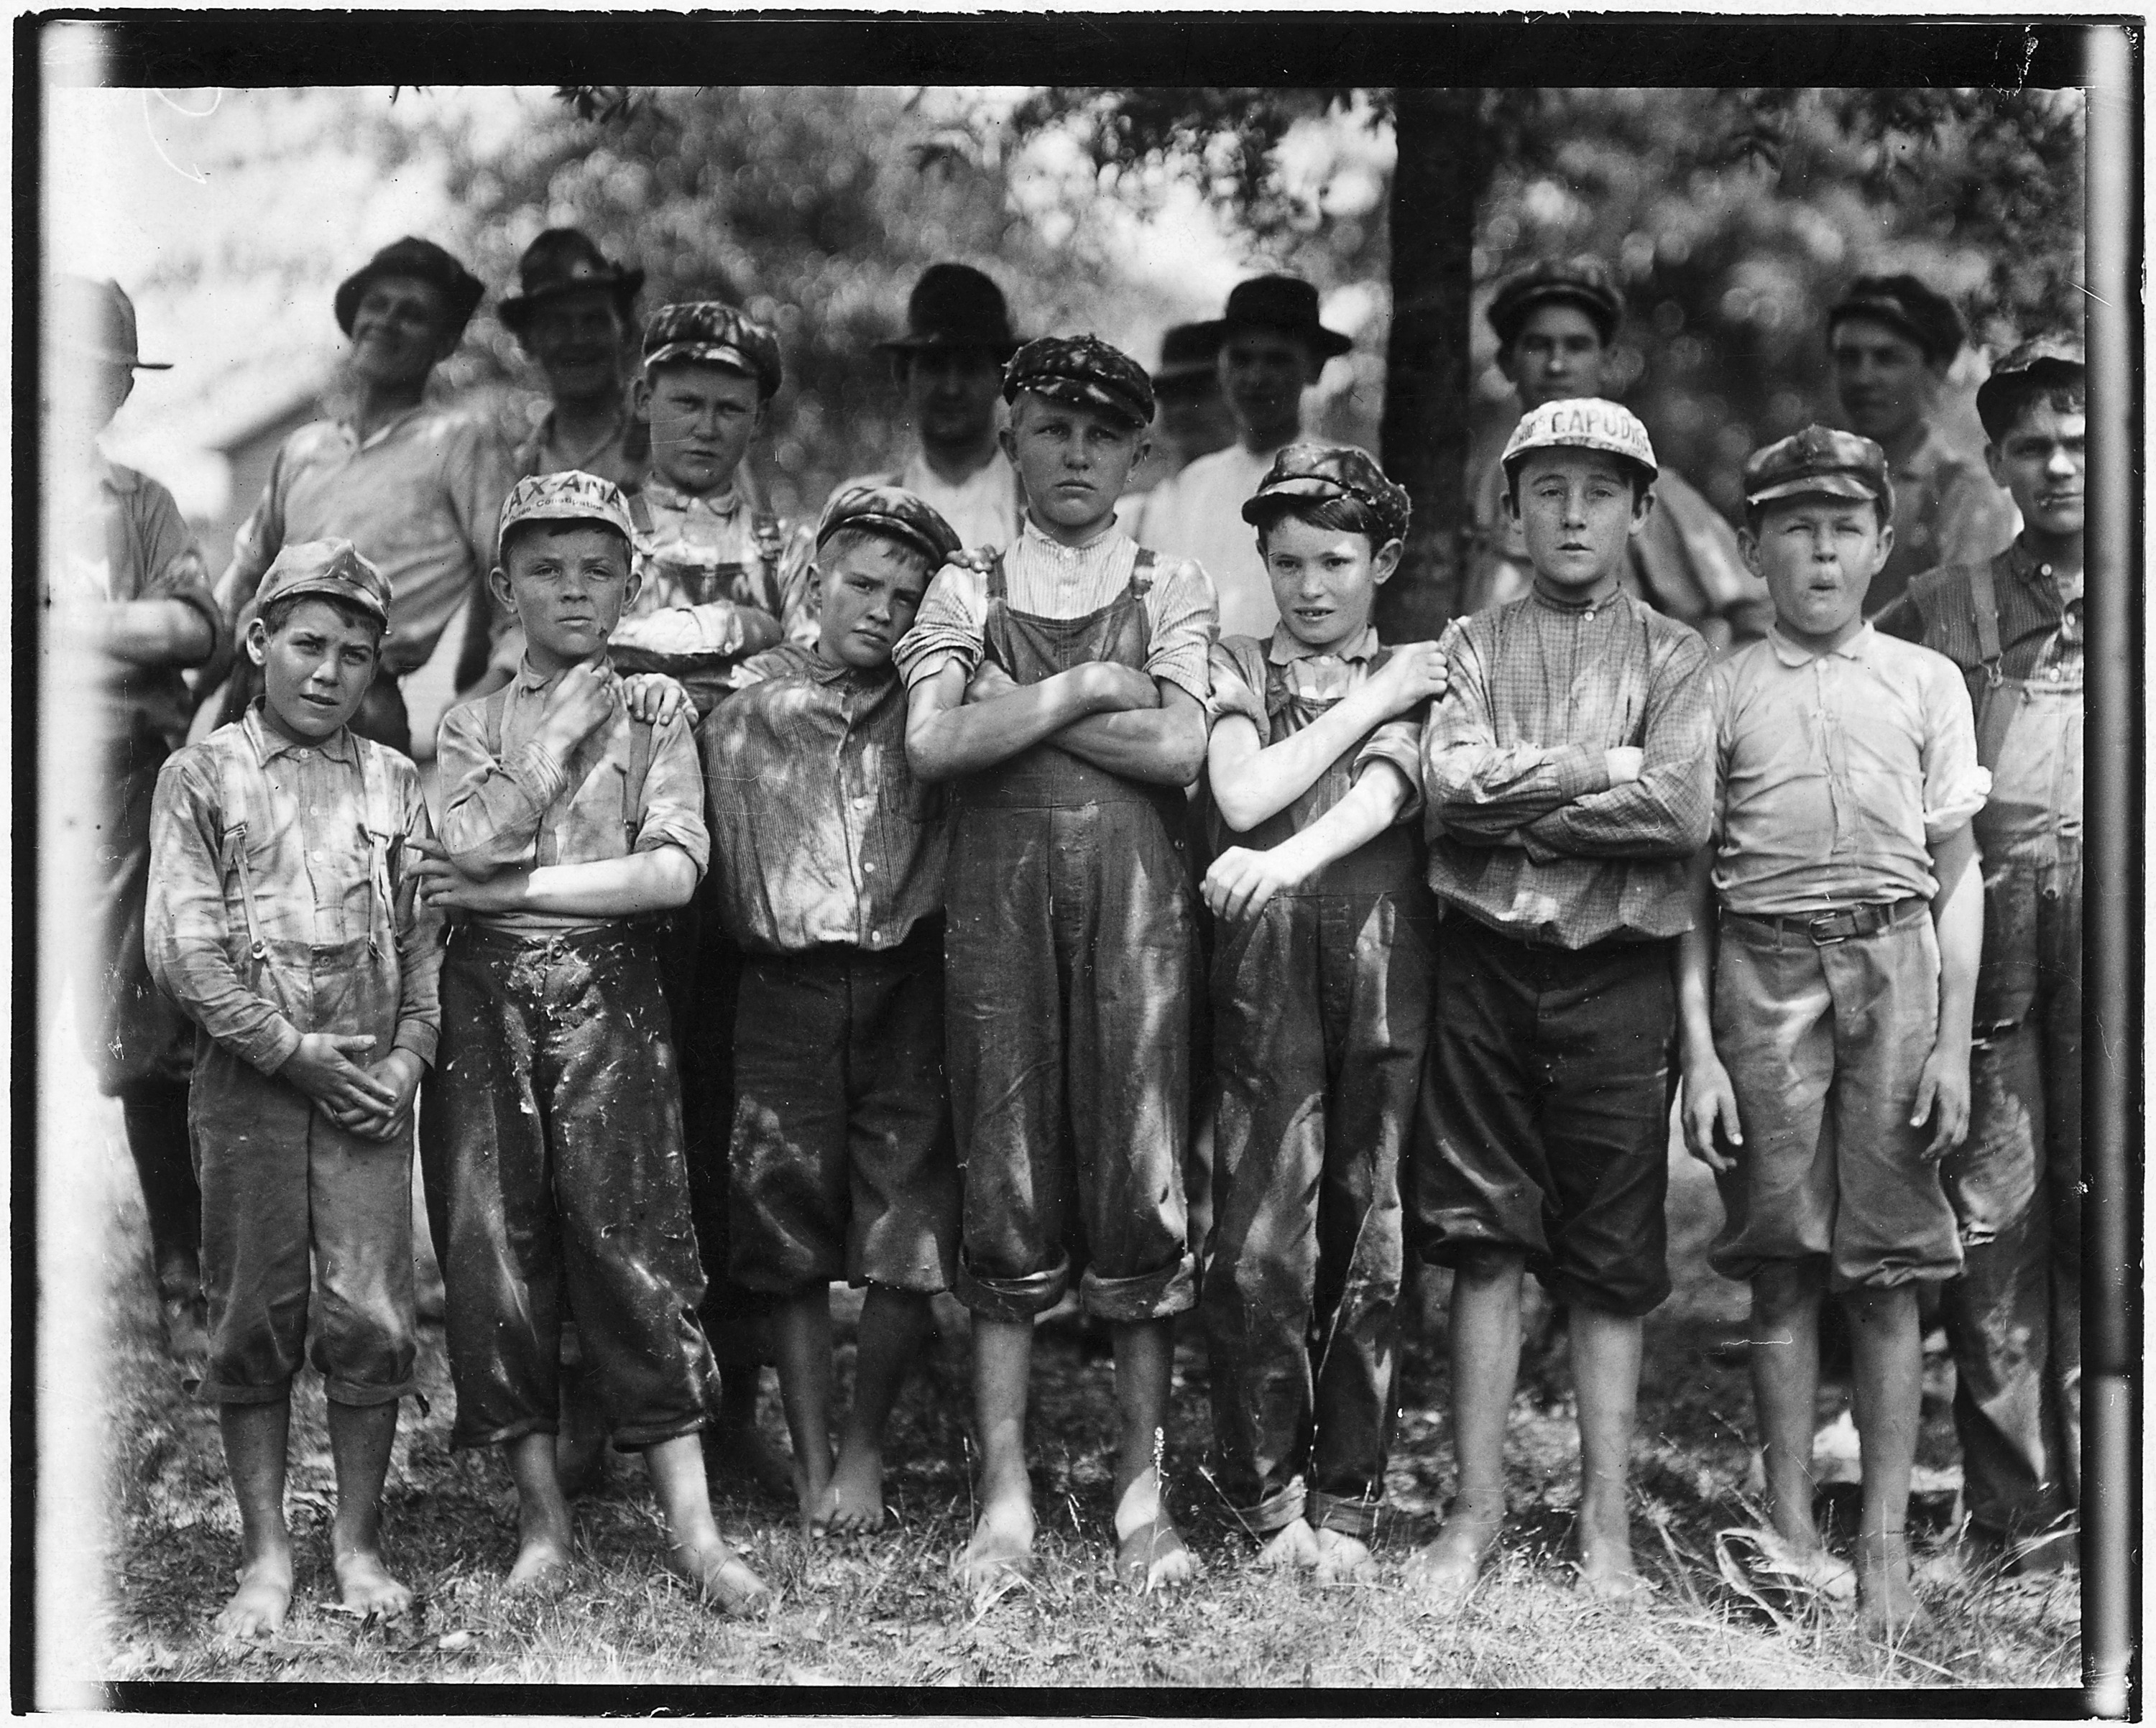 Some of the youngsters in the Belton Mfg. Co. Two of the youngest. Belton, S.C. - NARA - 523545